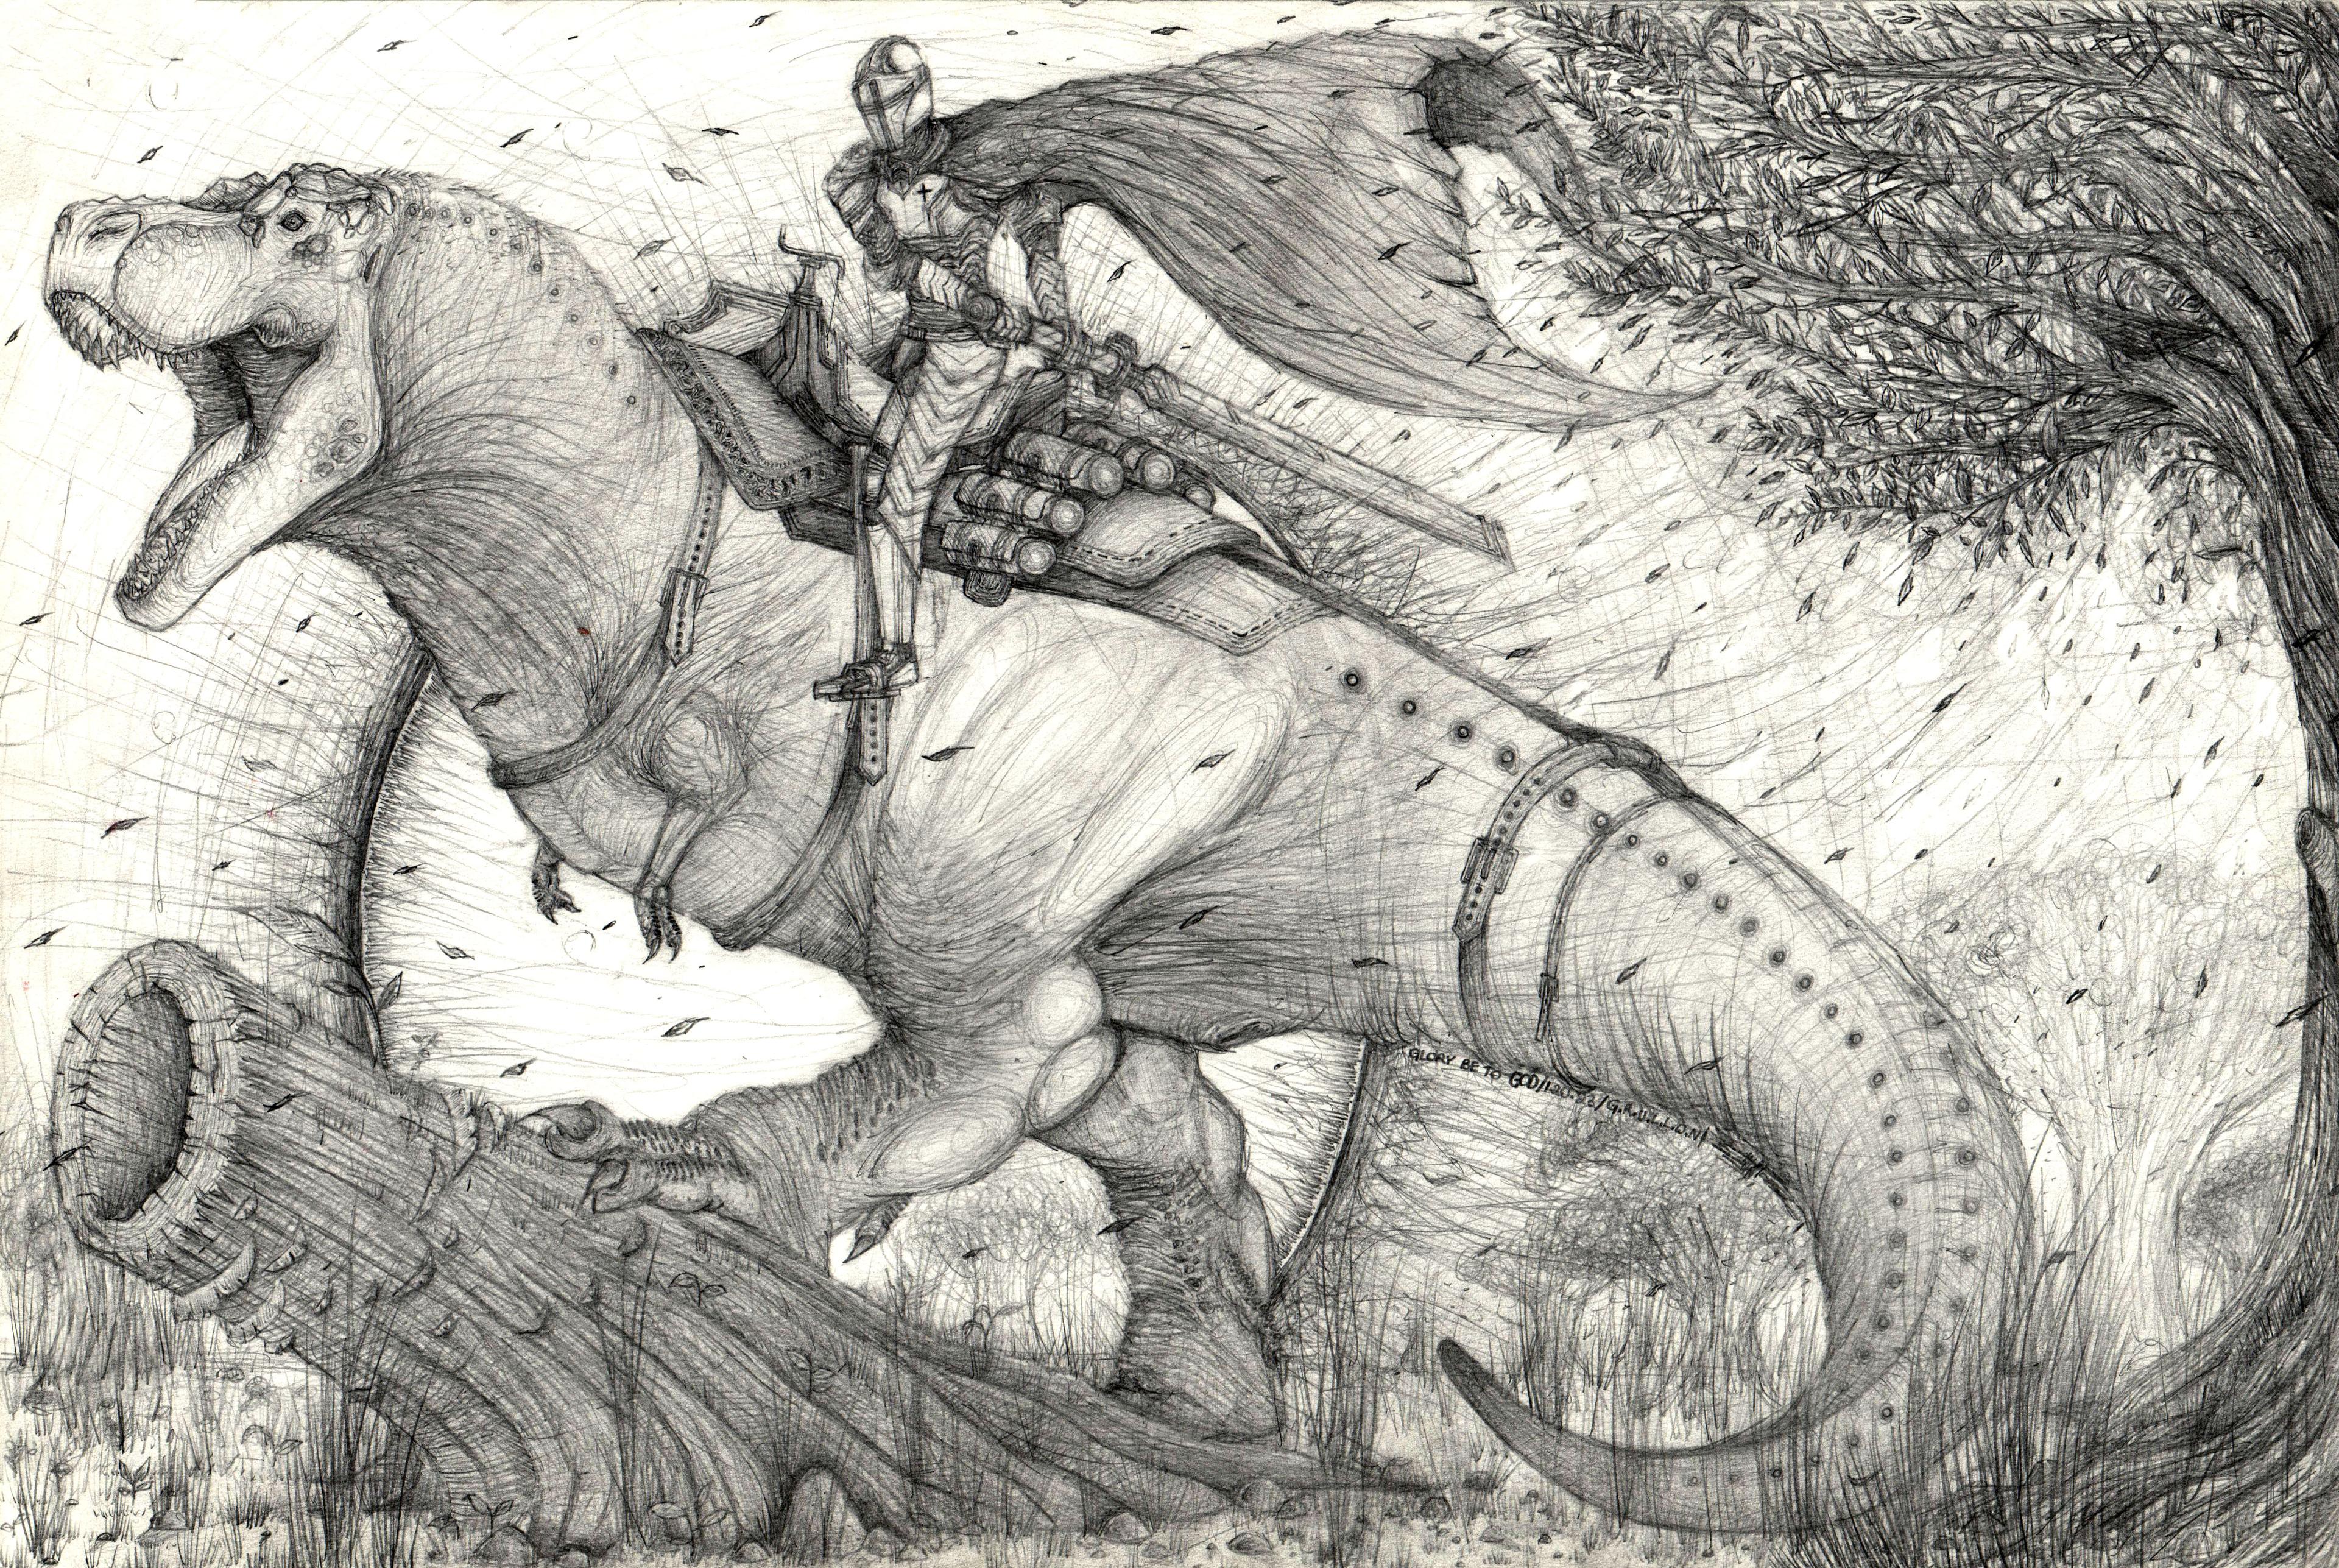 Graphite-on-watercolor black-and-white drawing of a fully armored medieval knight seated in a saddle, riding on the back of an enormous Tyrannosaurus Rex that faces left, with its bottom left foot perched atop a hollowed out log that emerges from the soil. The knight wears a long billowing cape that flows behind him, and he holds a long sword with his right hand across his left hip, pointed behind his back to his rear. The saddle is held to the dinosaur with straps encircling its torso. A tall tree to the right appears to be shedding its leaves, which flit all over and around the knight and the T. rex. A large, ringed halo appears in the background behind the dinosaur and its rider.